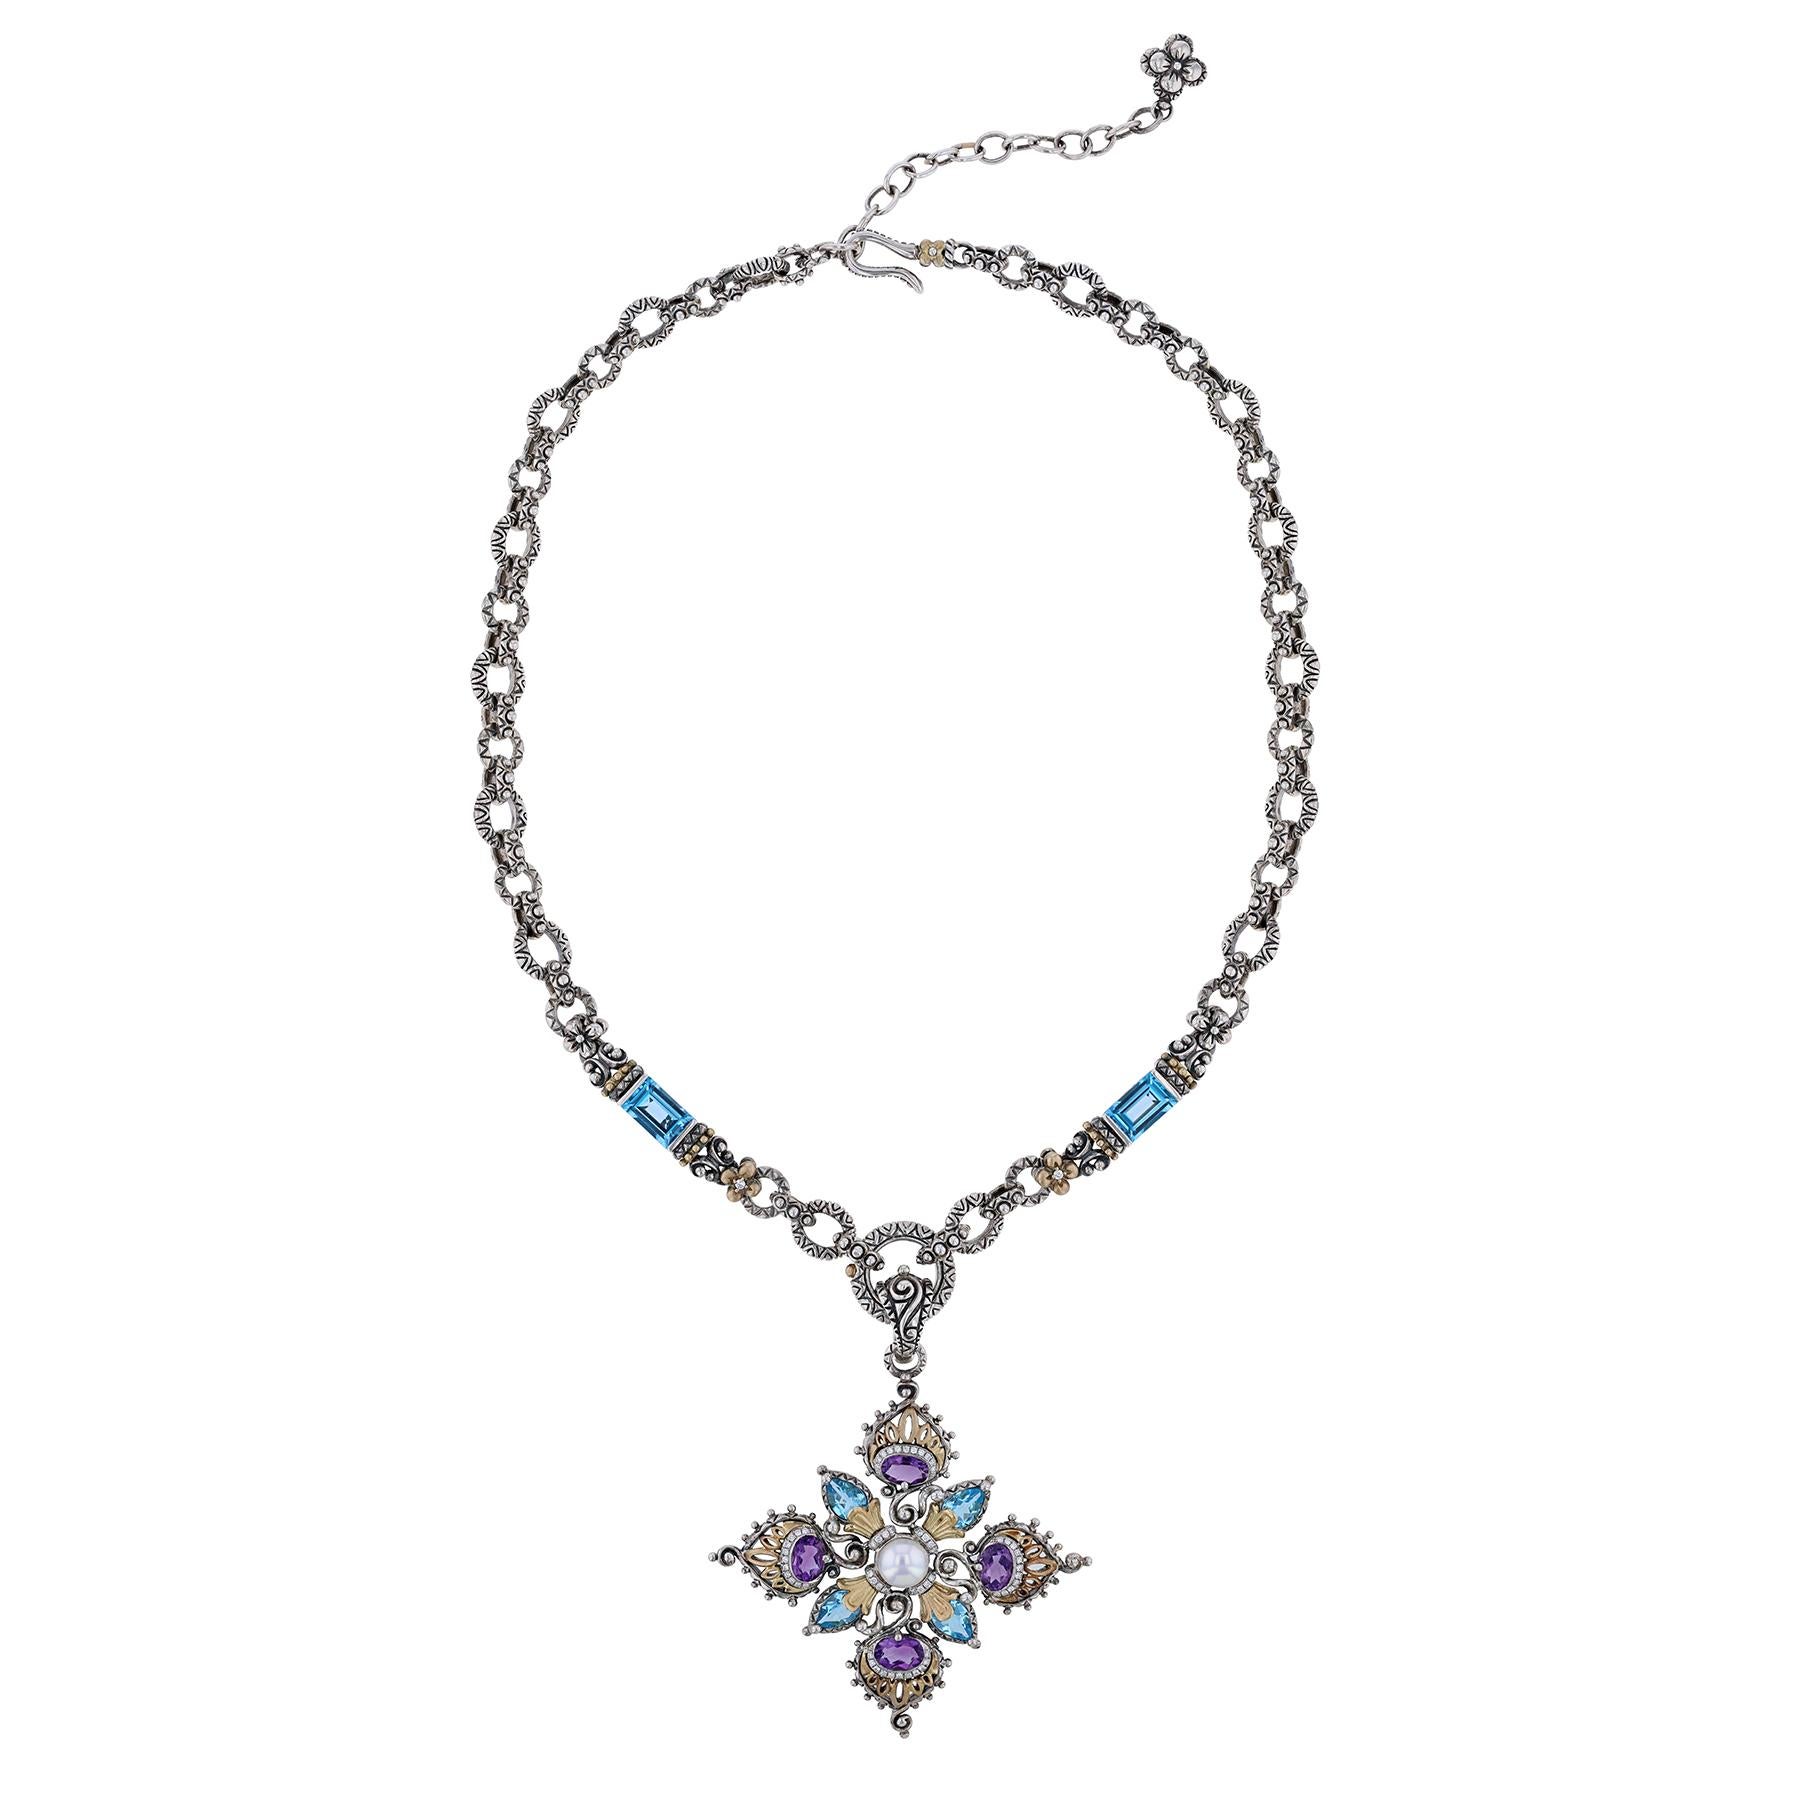 The pendant is sterling silver and 18K yellow gold peacock cross pendant. Cross features oval amethyst stones with row of pave-set round diamonds set below; marquis shaped blue topaz with 18K yellow gold endcaps and a freshwater pearl center with